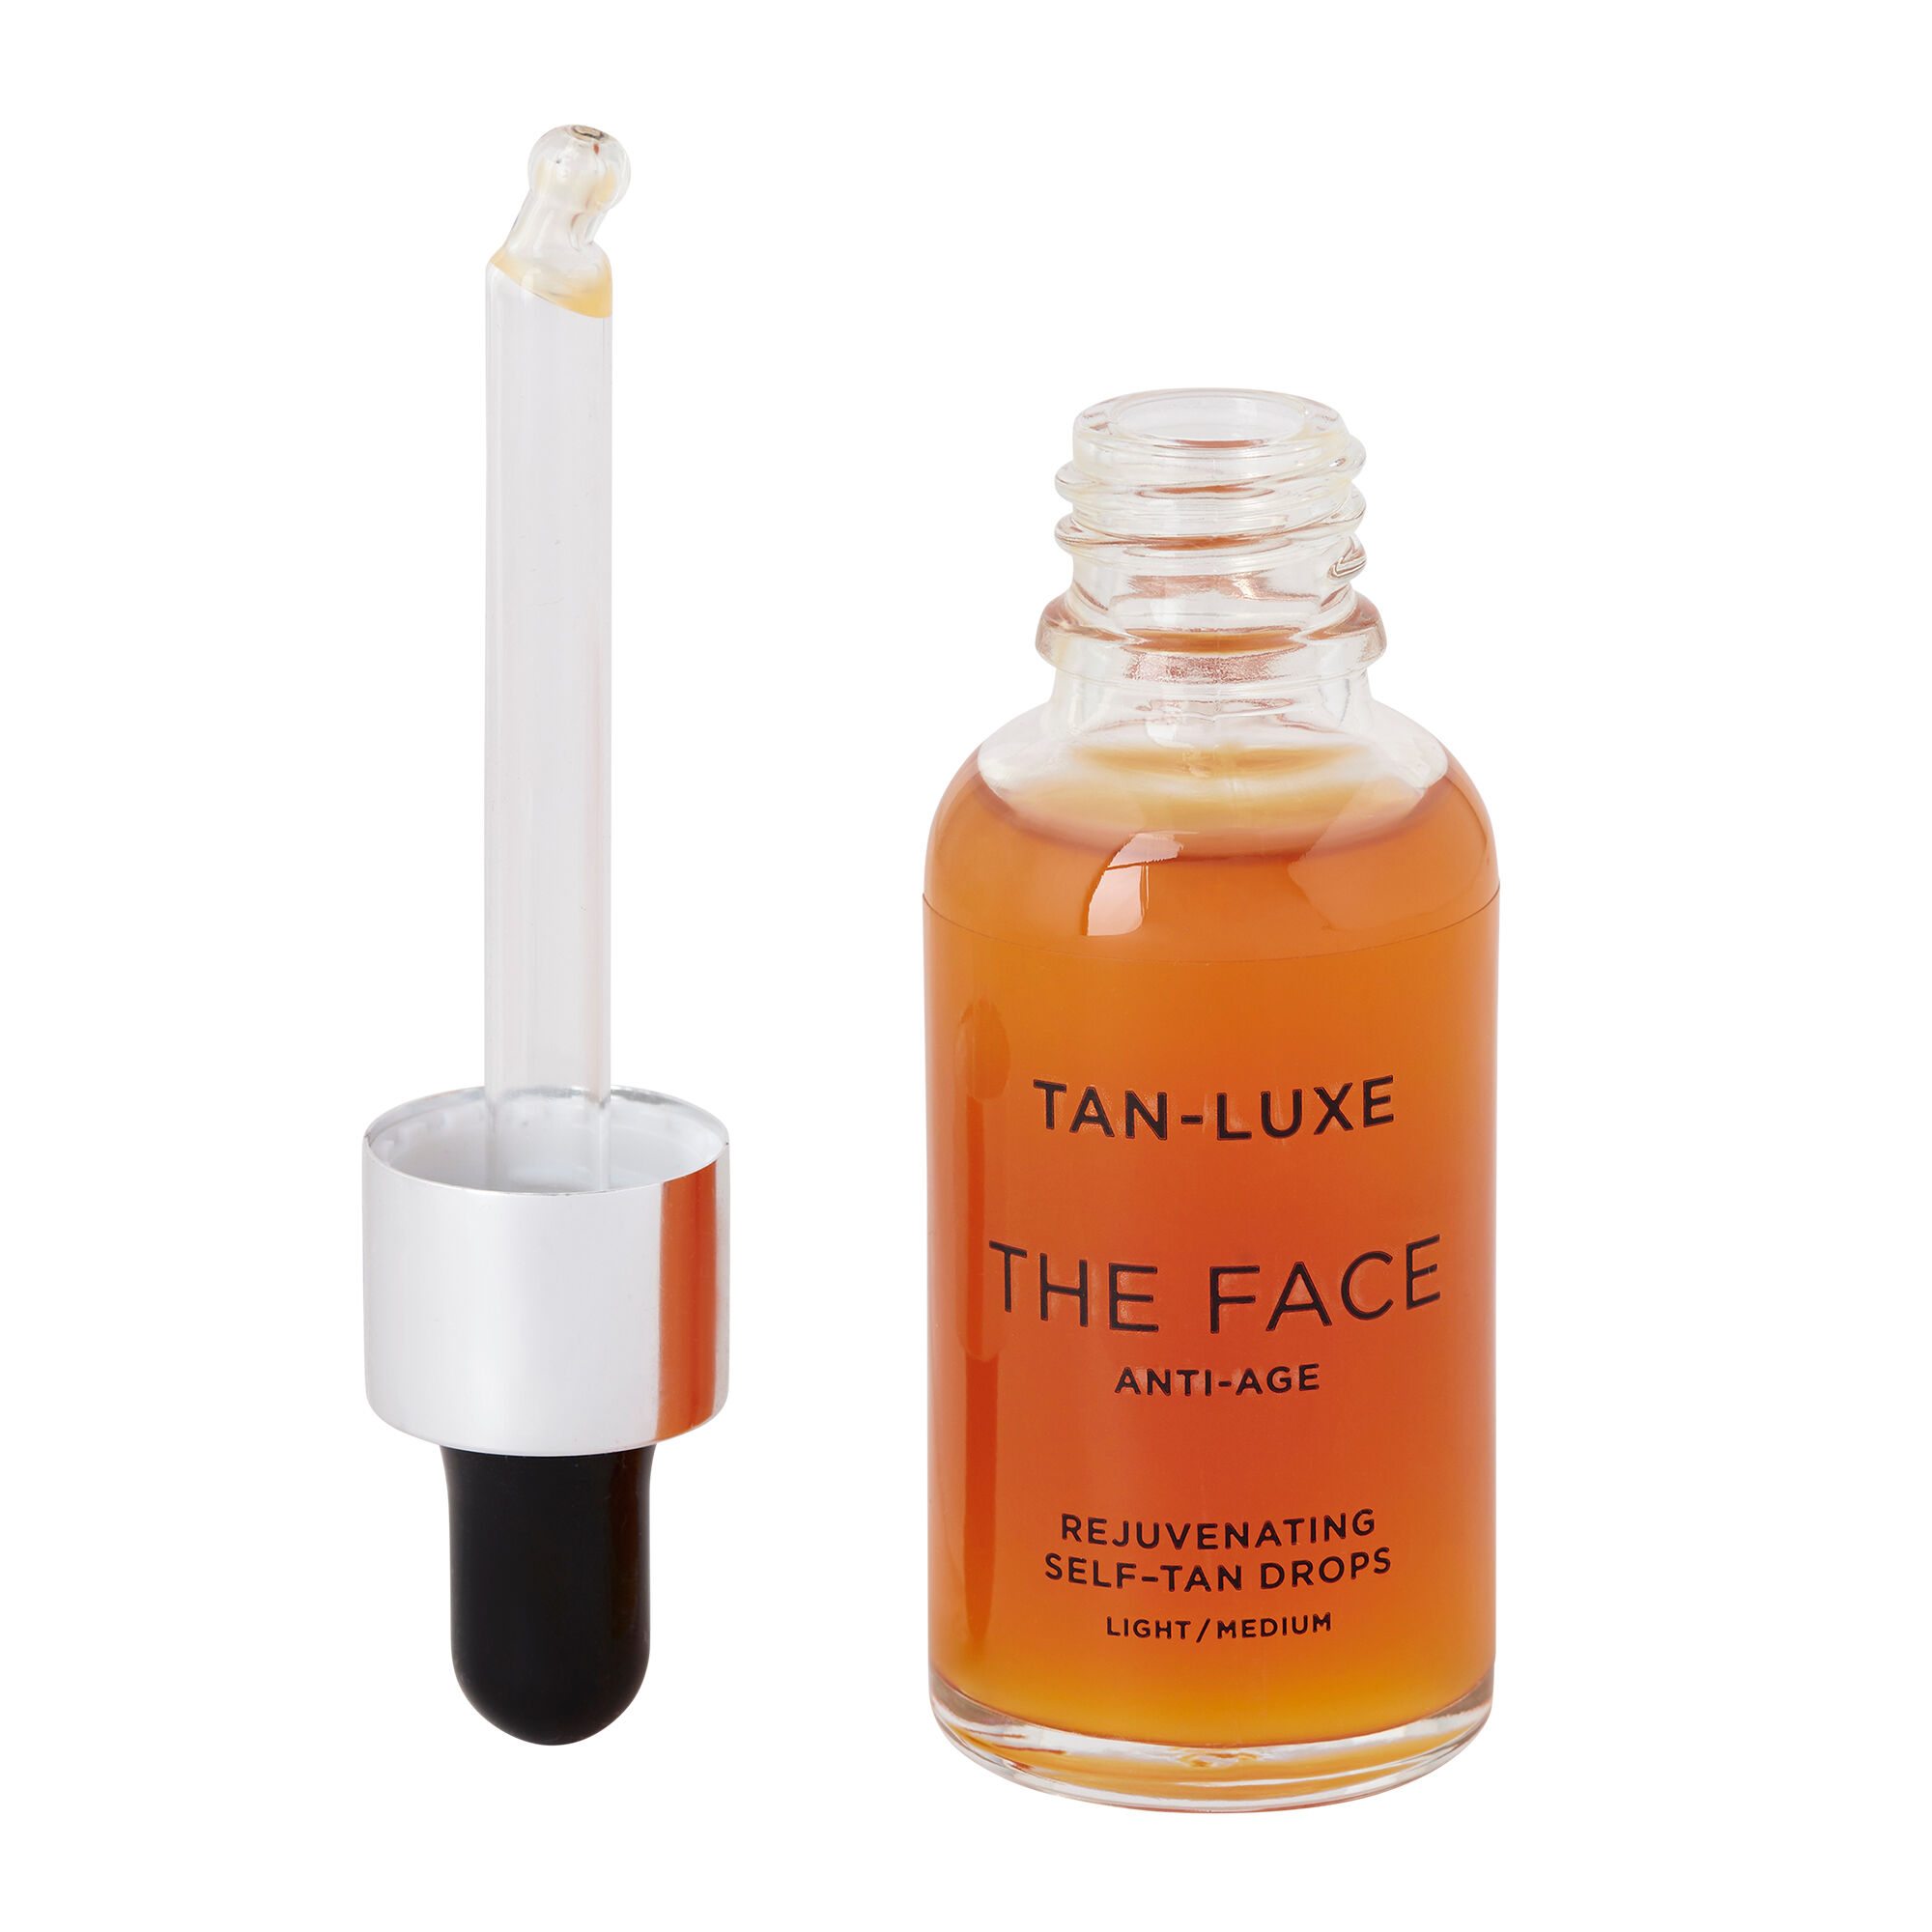 TAN-LUXE The FACE AntiAge 30ml